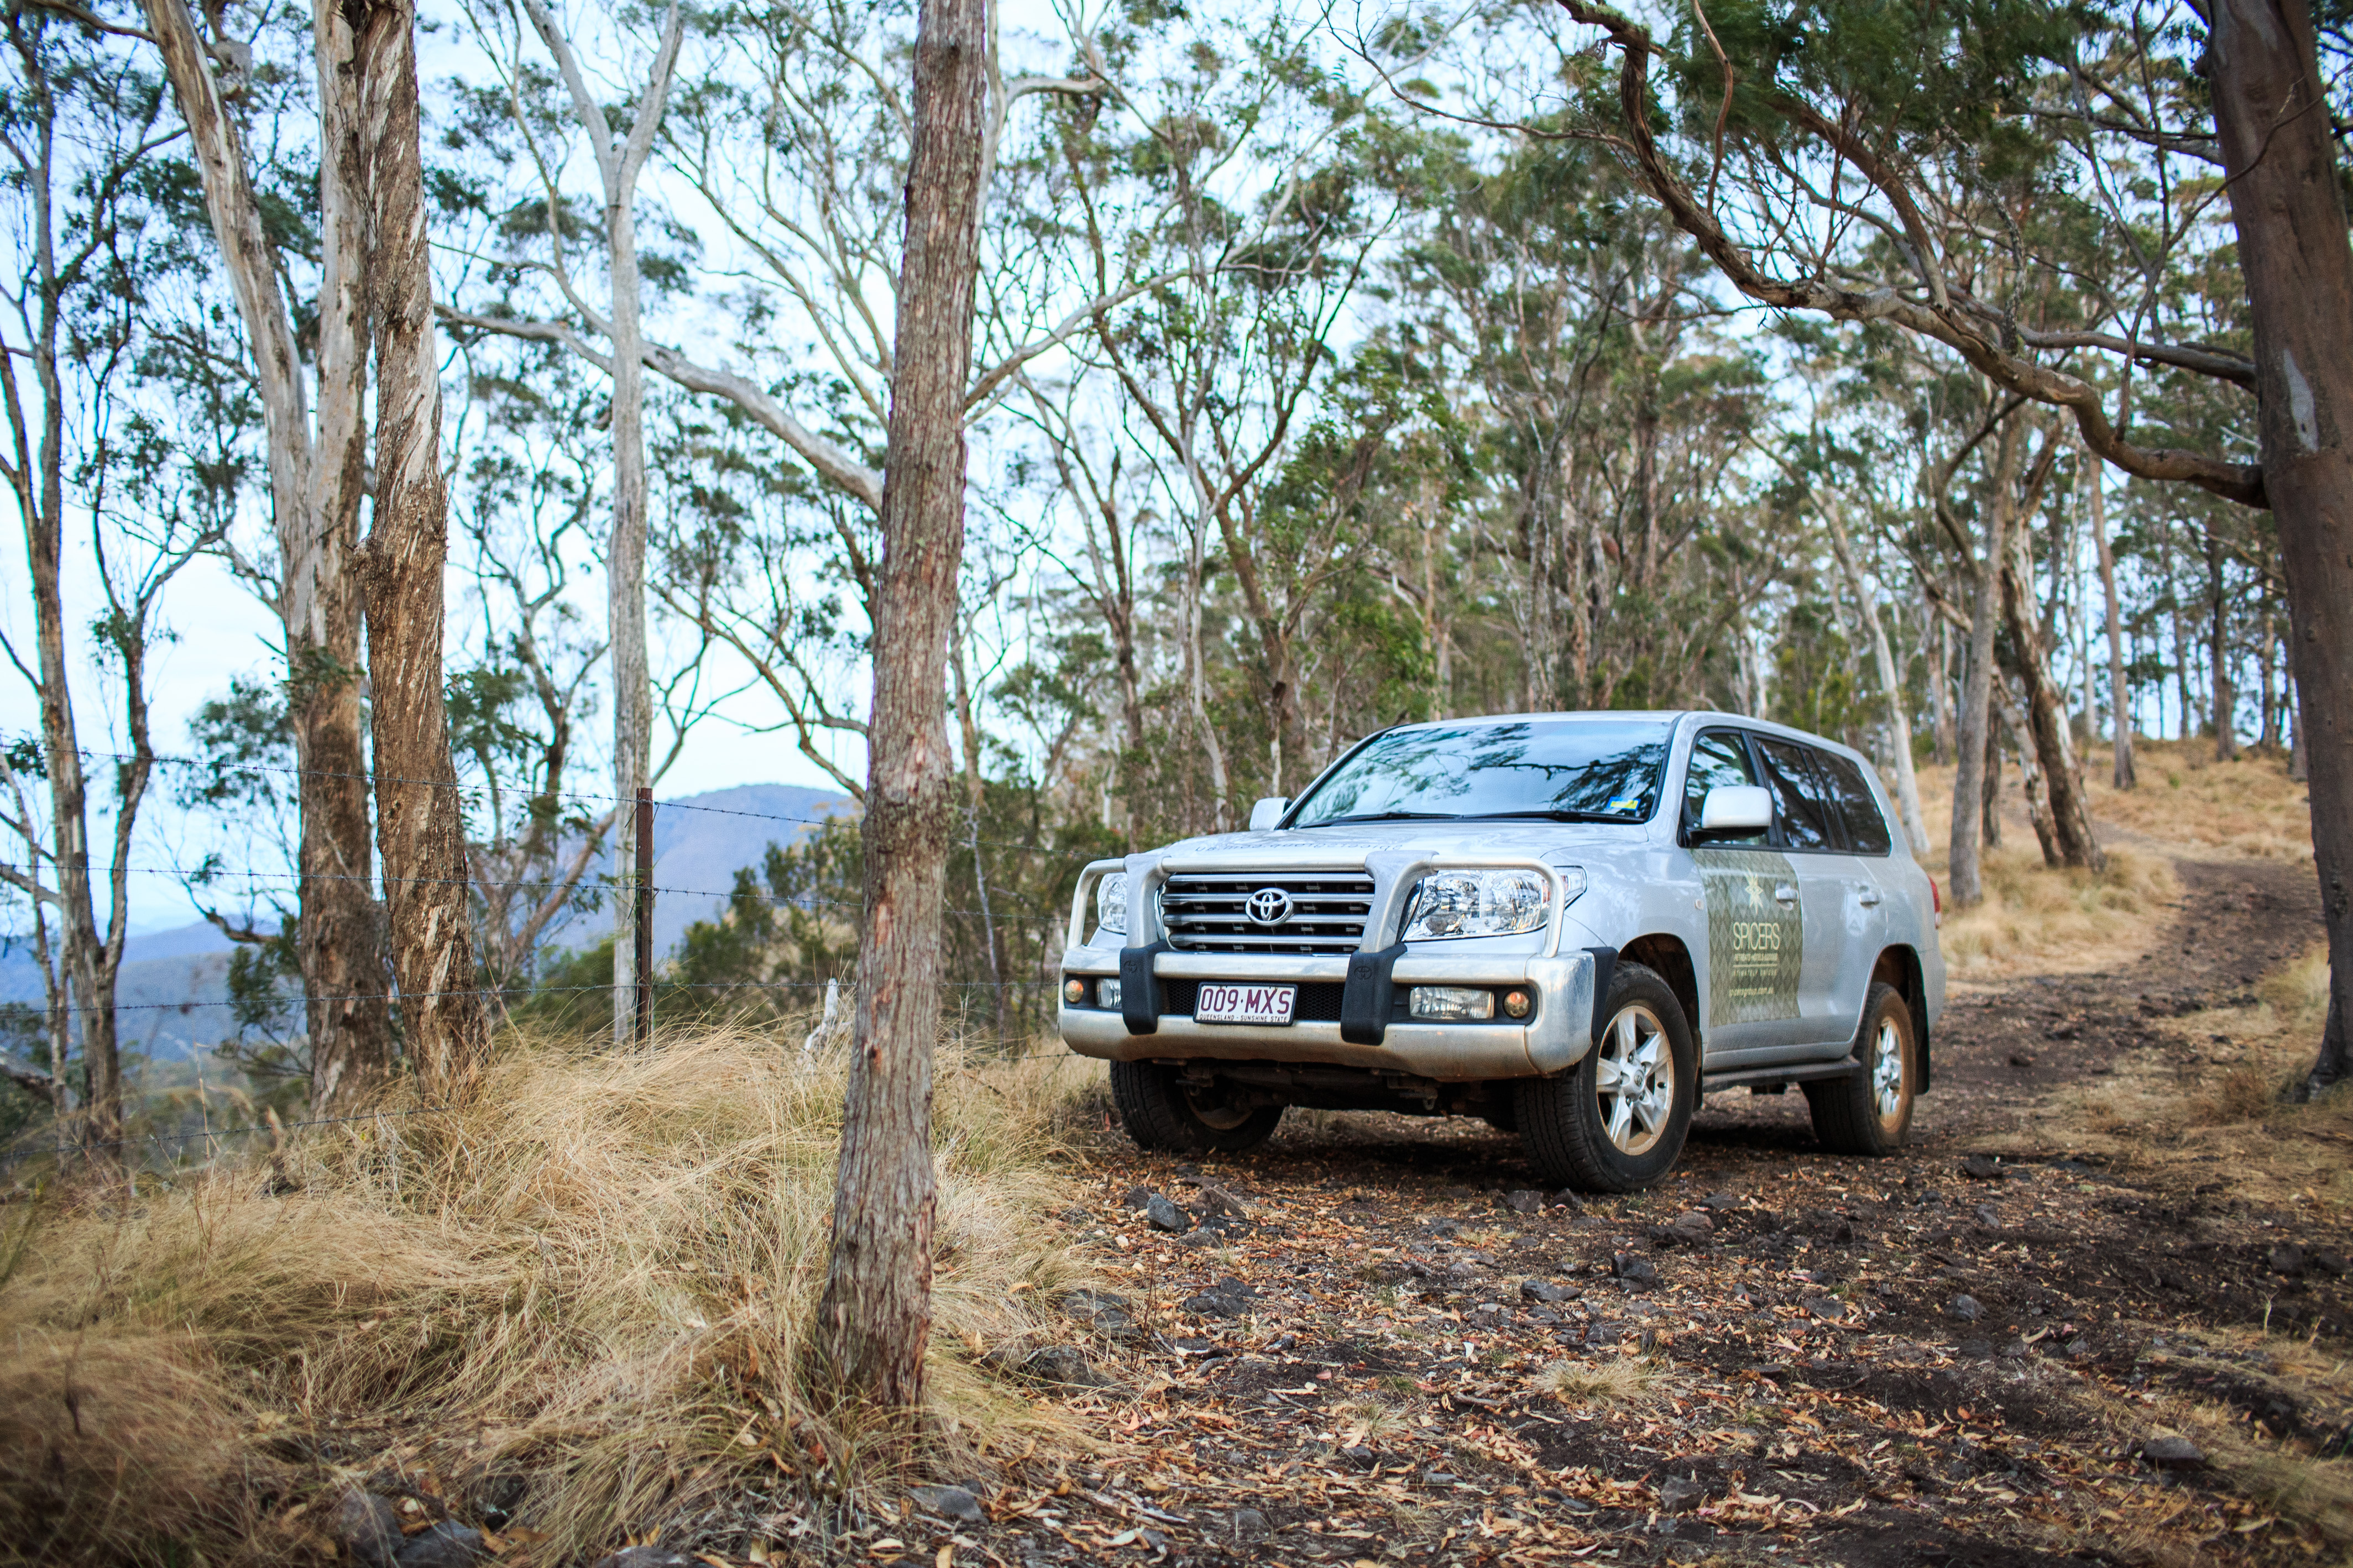 Spicers-Peak-Lodge_Scenic-Rim_4WD - Click to view larger version